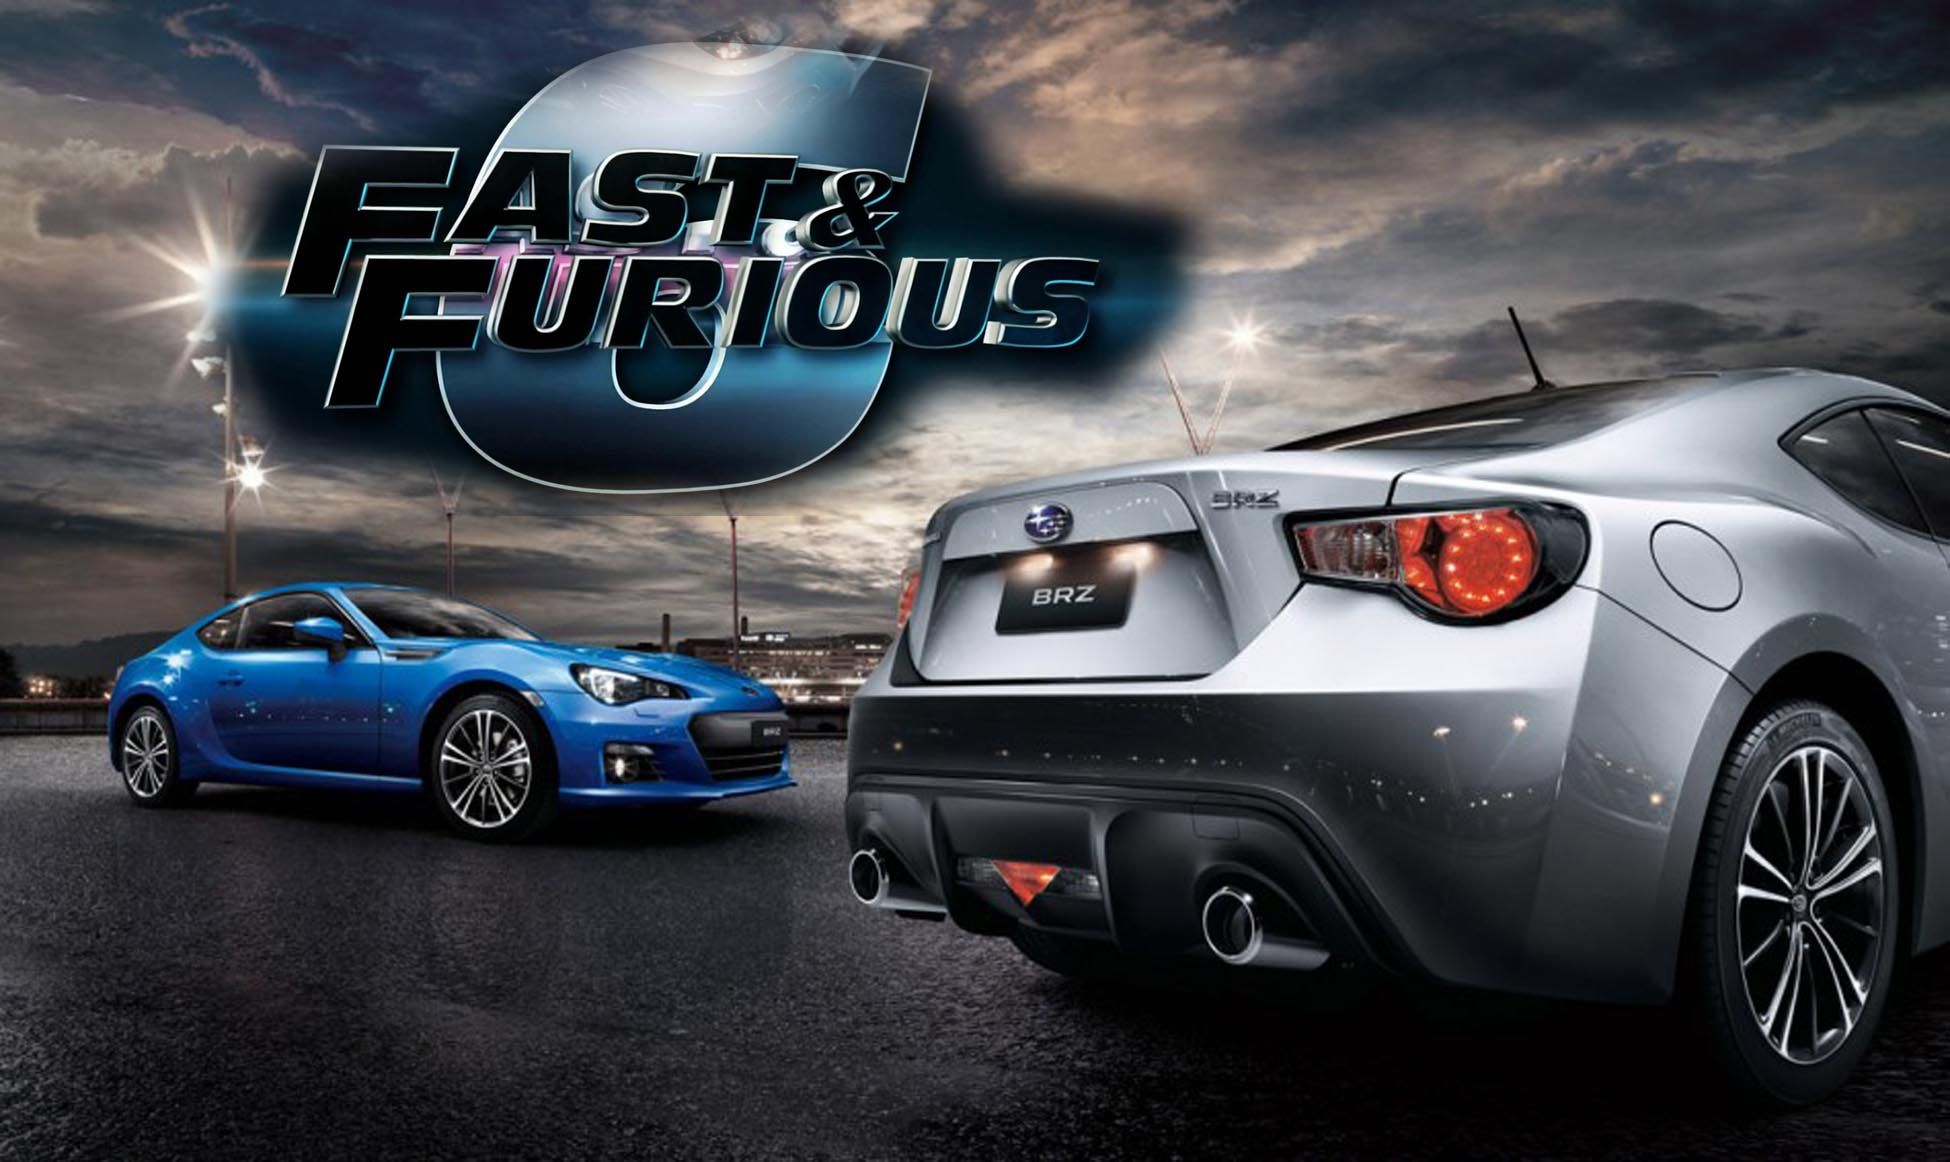 HD wallpaper, 6, Movie, Furious, And, Fast, 2013